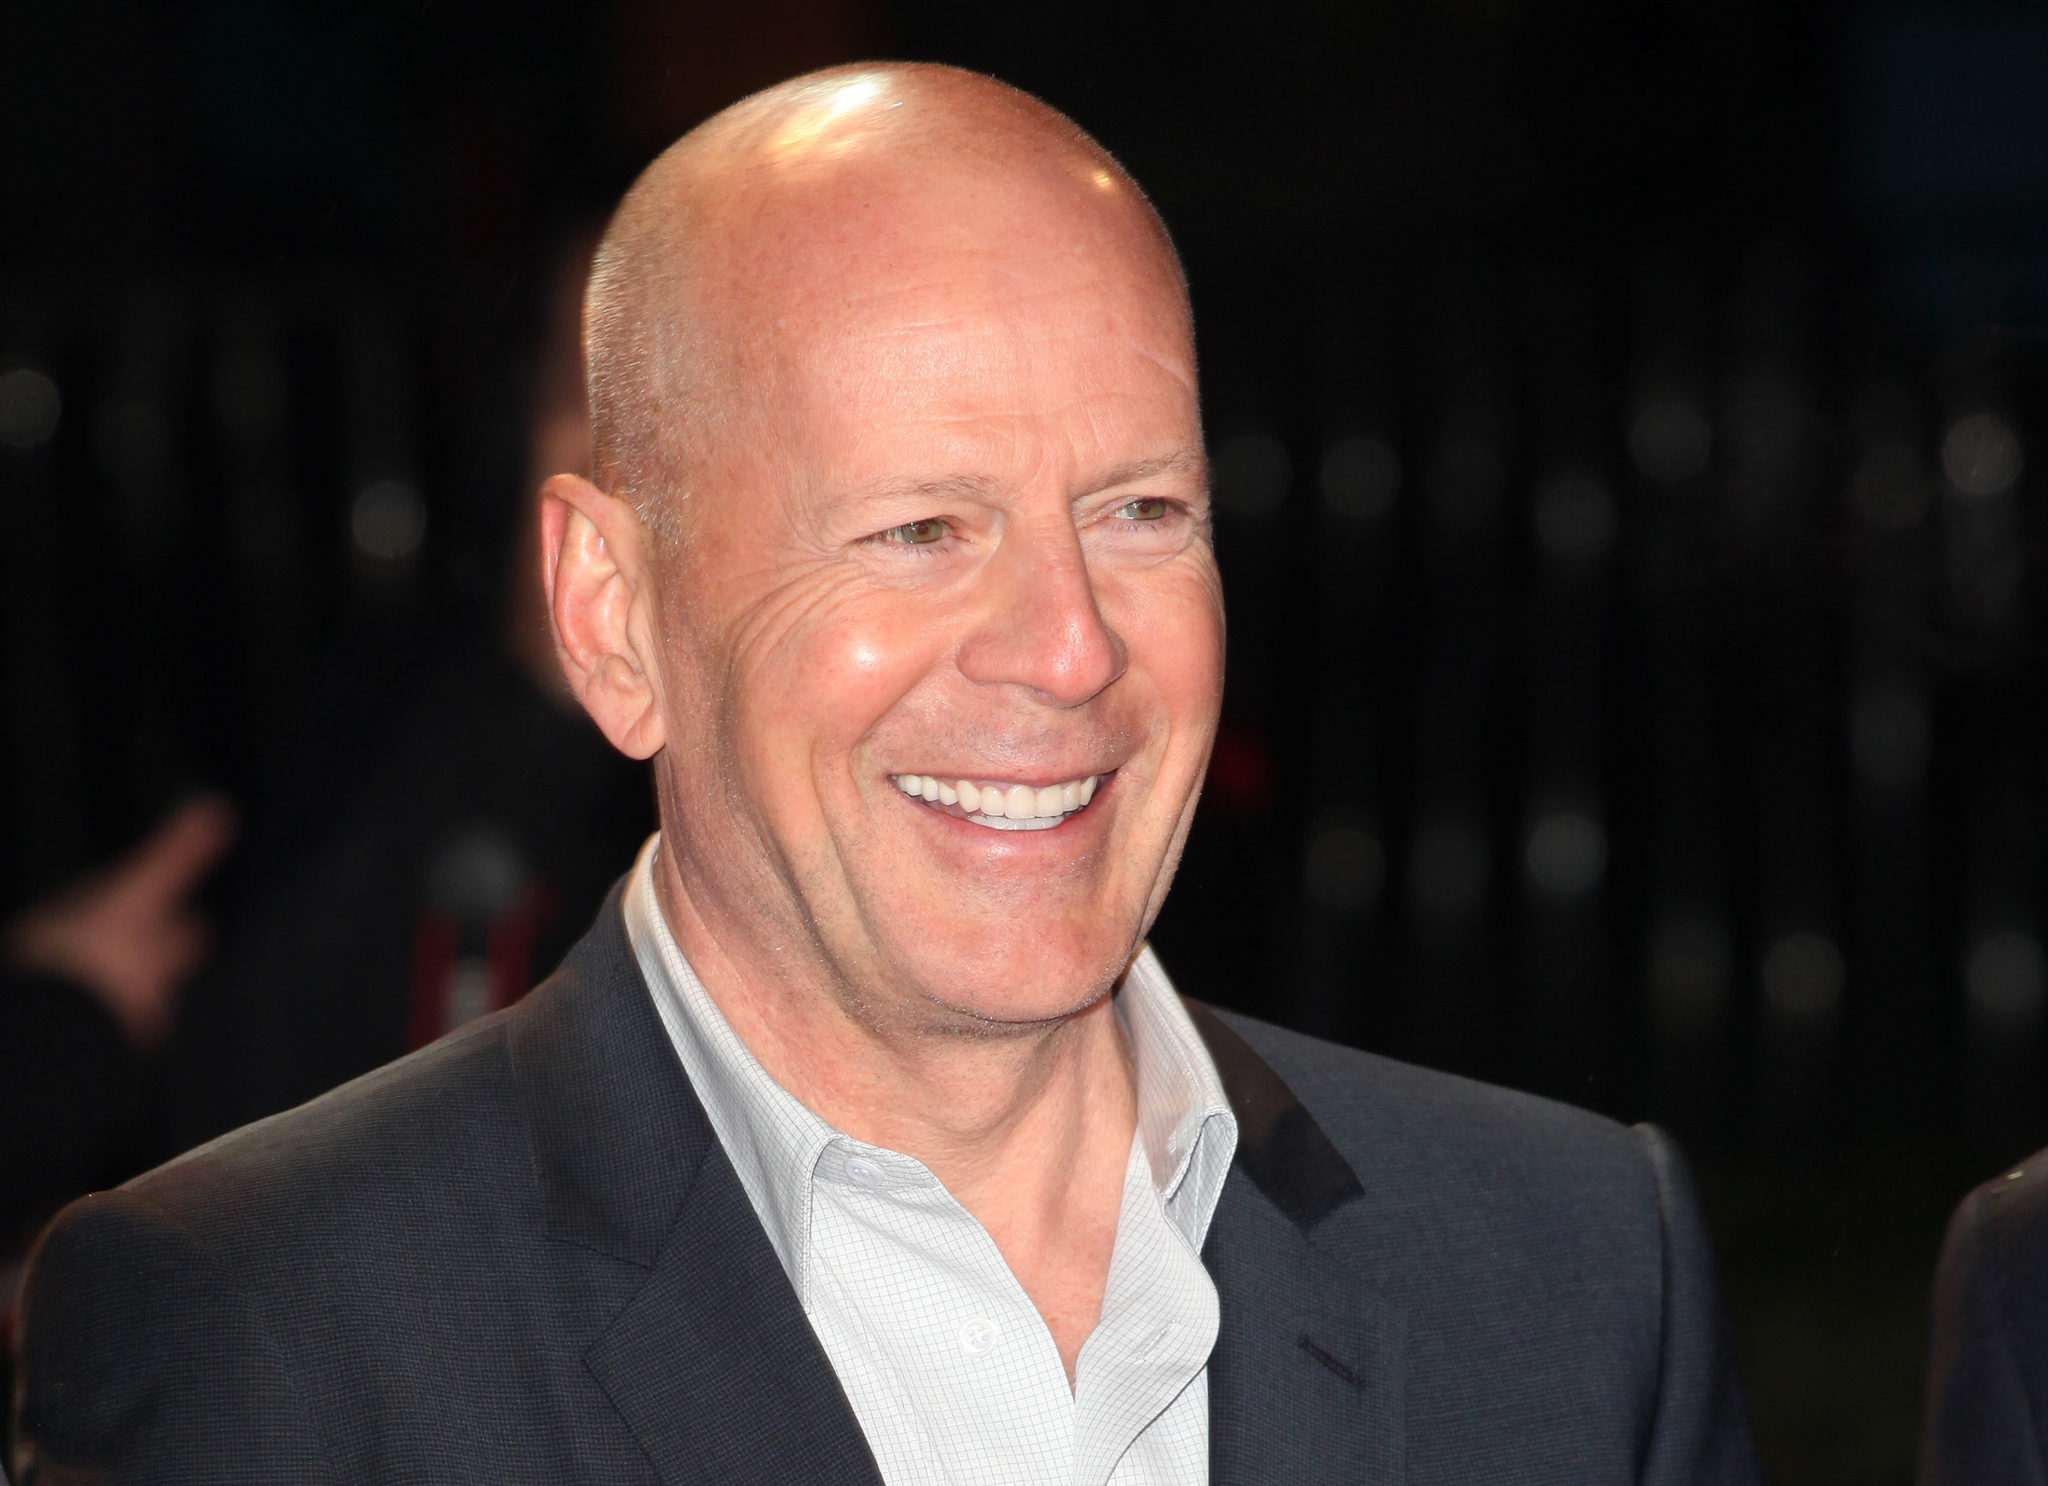 Bruce Willis, smiling in a suit